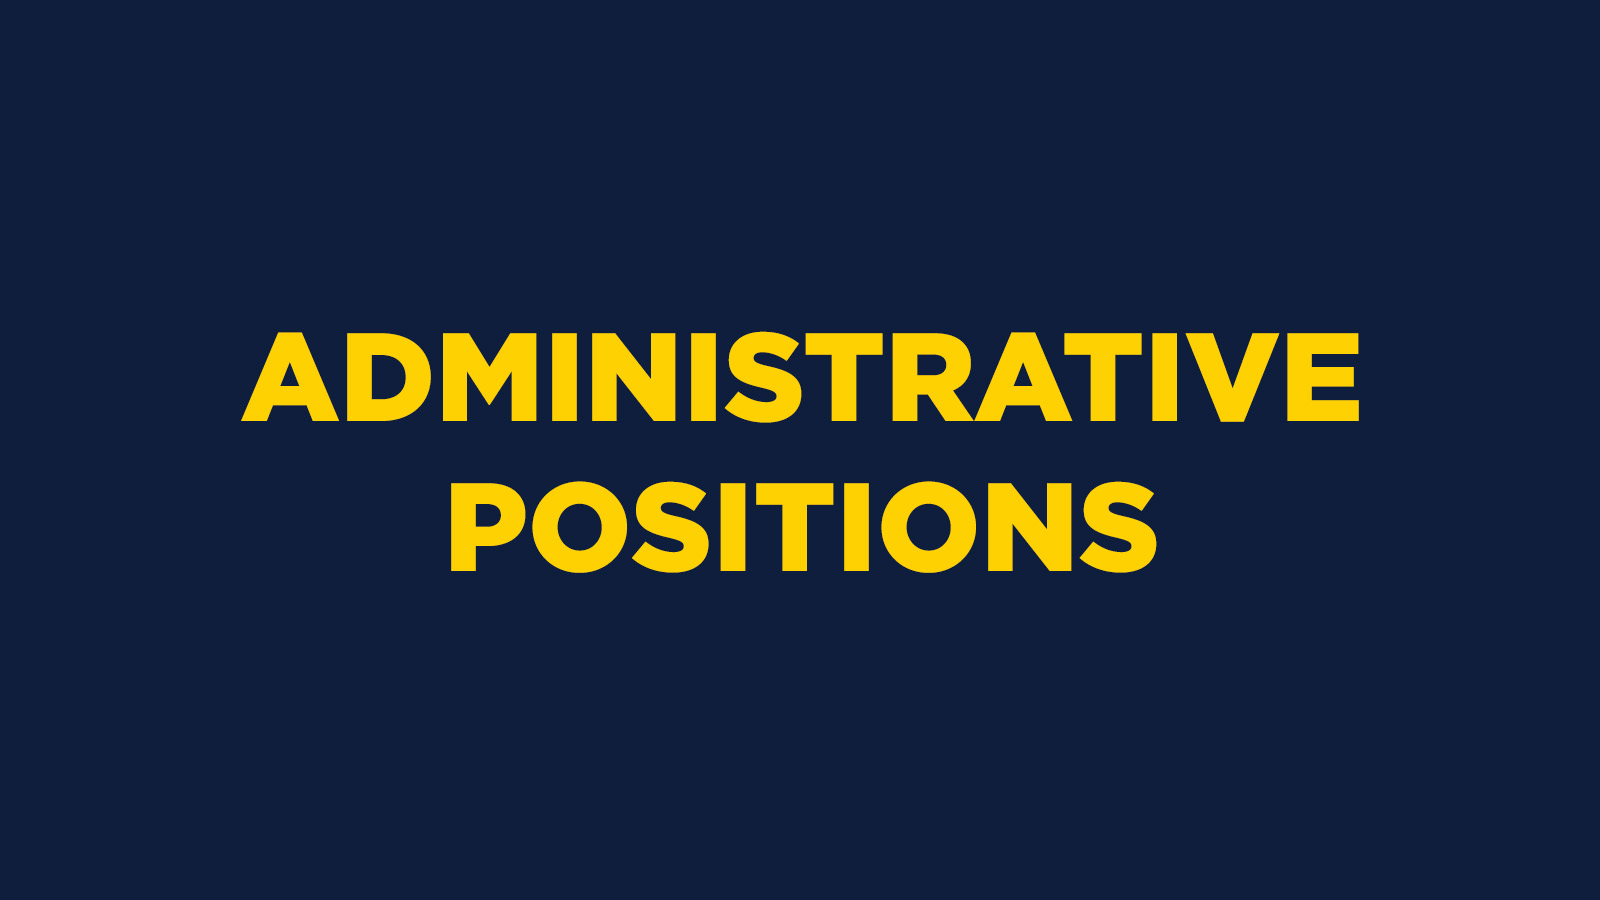 ADMINISTRATIVE POSITIONS